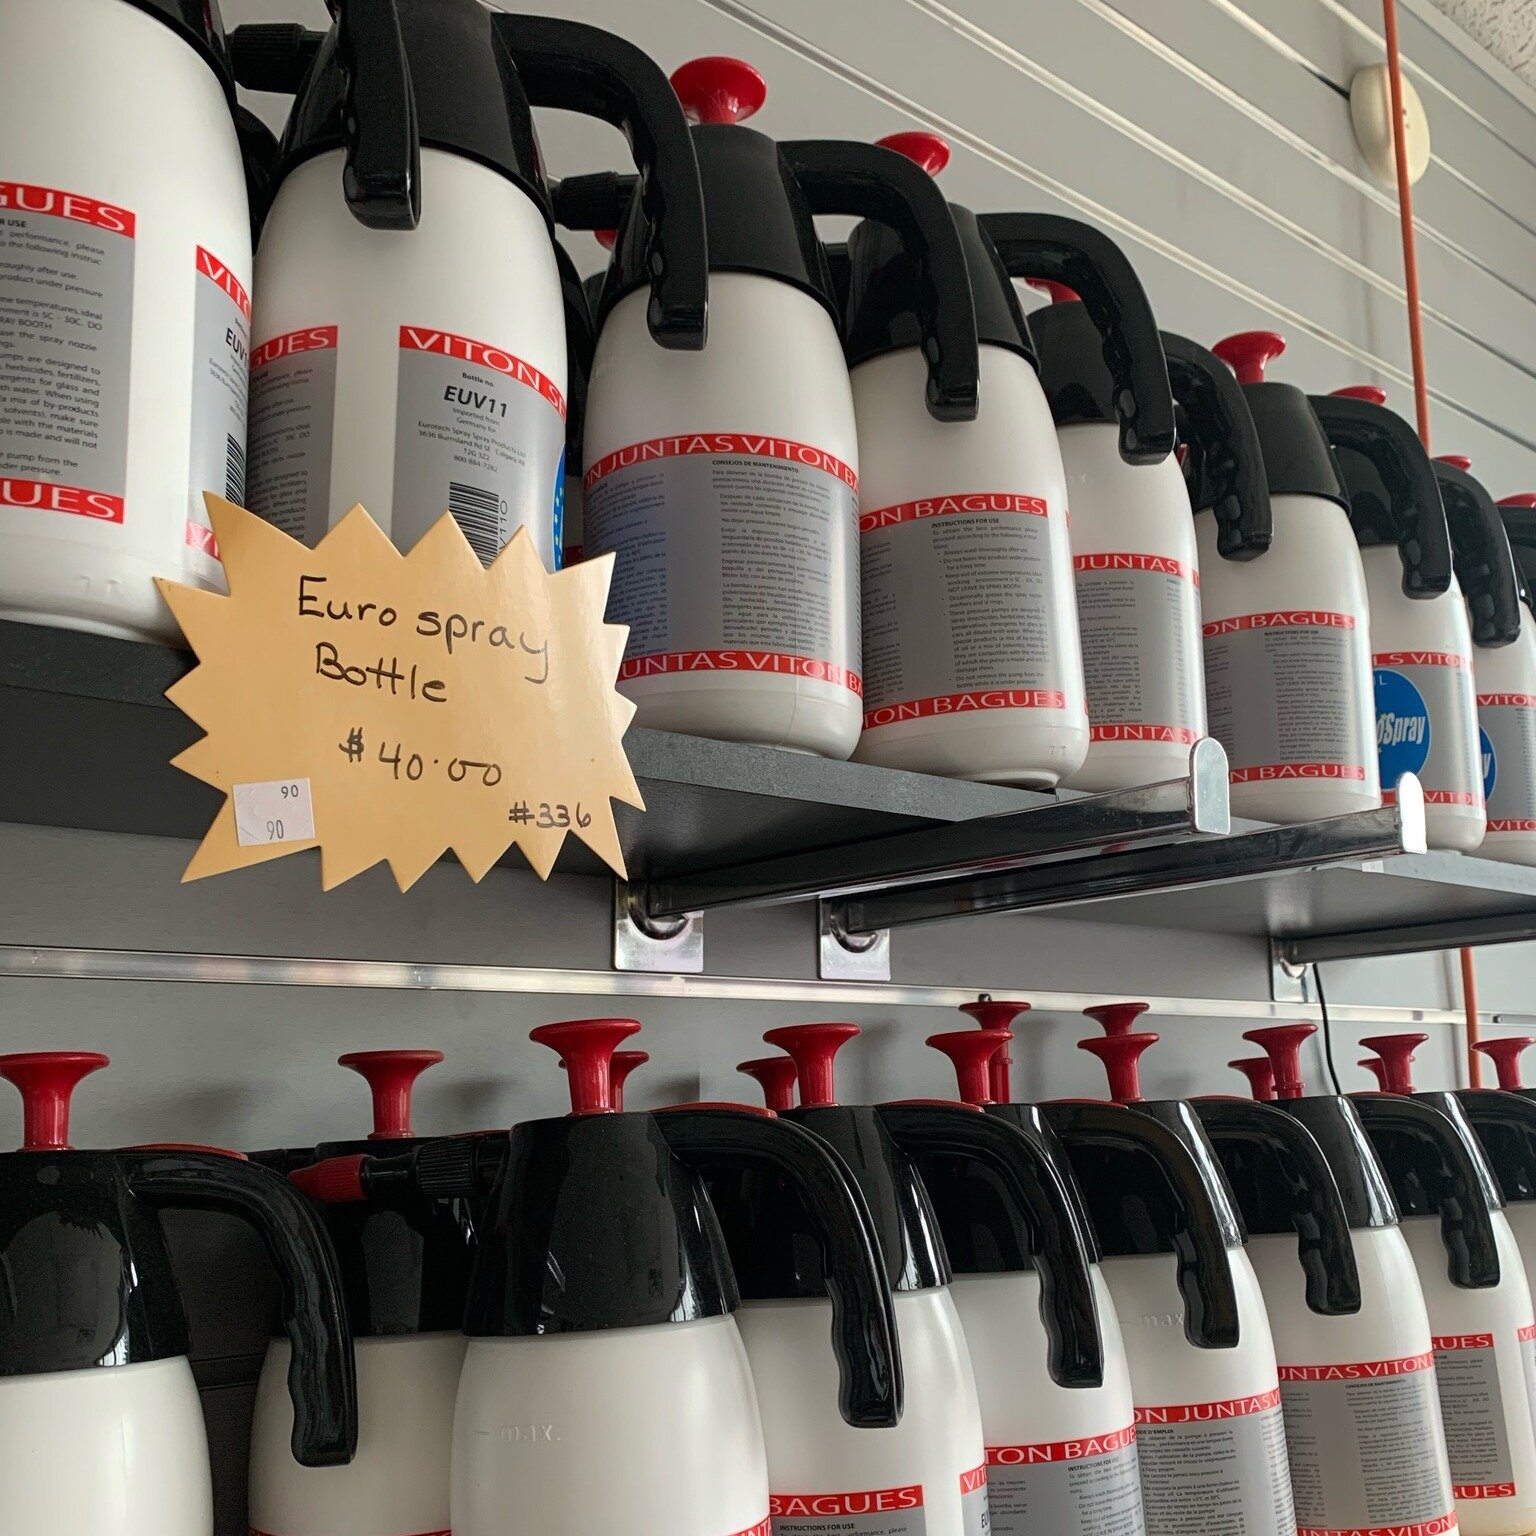 We always have deals in-store! Get a brand new spray bottle for just $40.00! Dm us for more details. 🧰 

#airtoolaccessories #toolsales #tooldeals